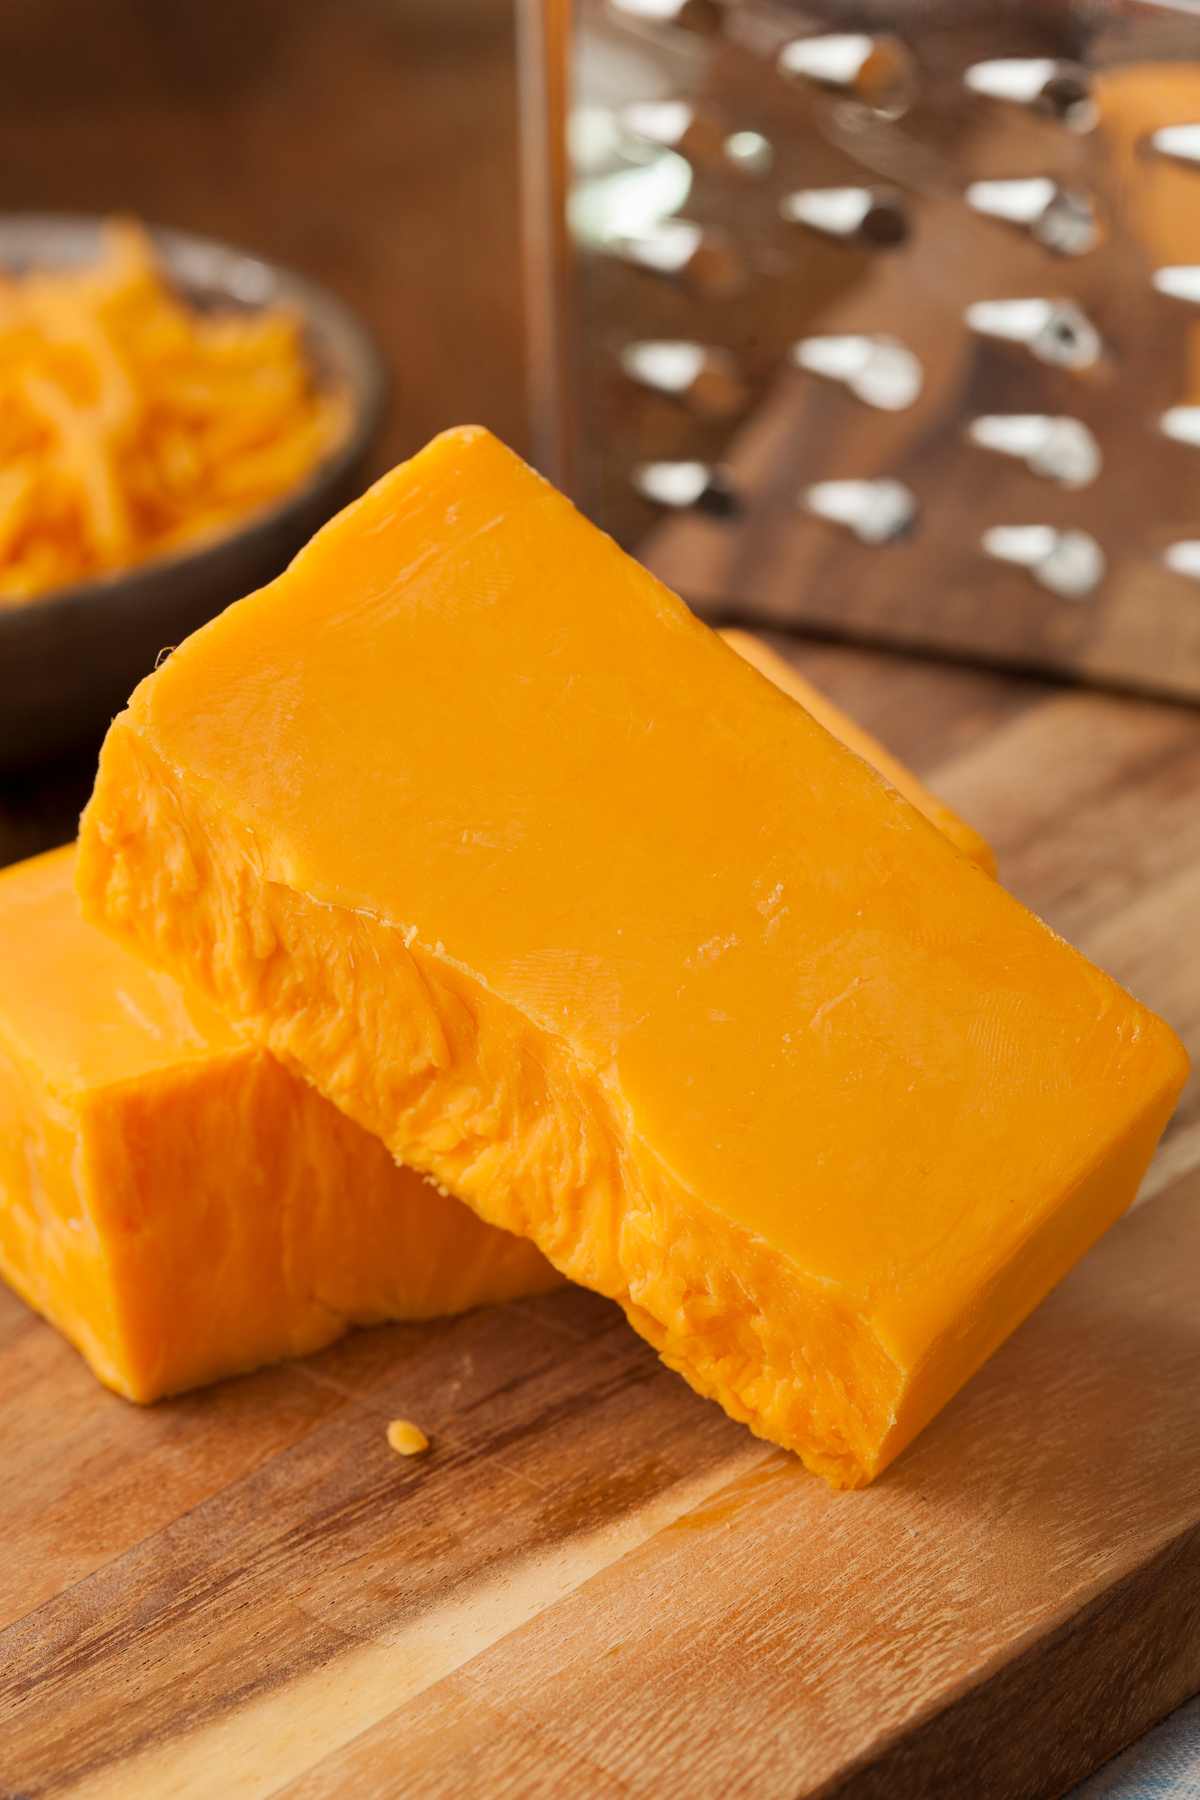 Are you a fan of cheddar cheese but wondering if it fits into your keto diet plan? In this post, we will explore the carb content of cheddar cheese and share with you some delicious low-carb keto cheddar cheese recipes.